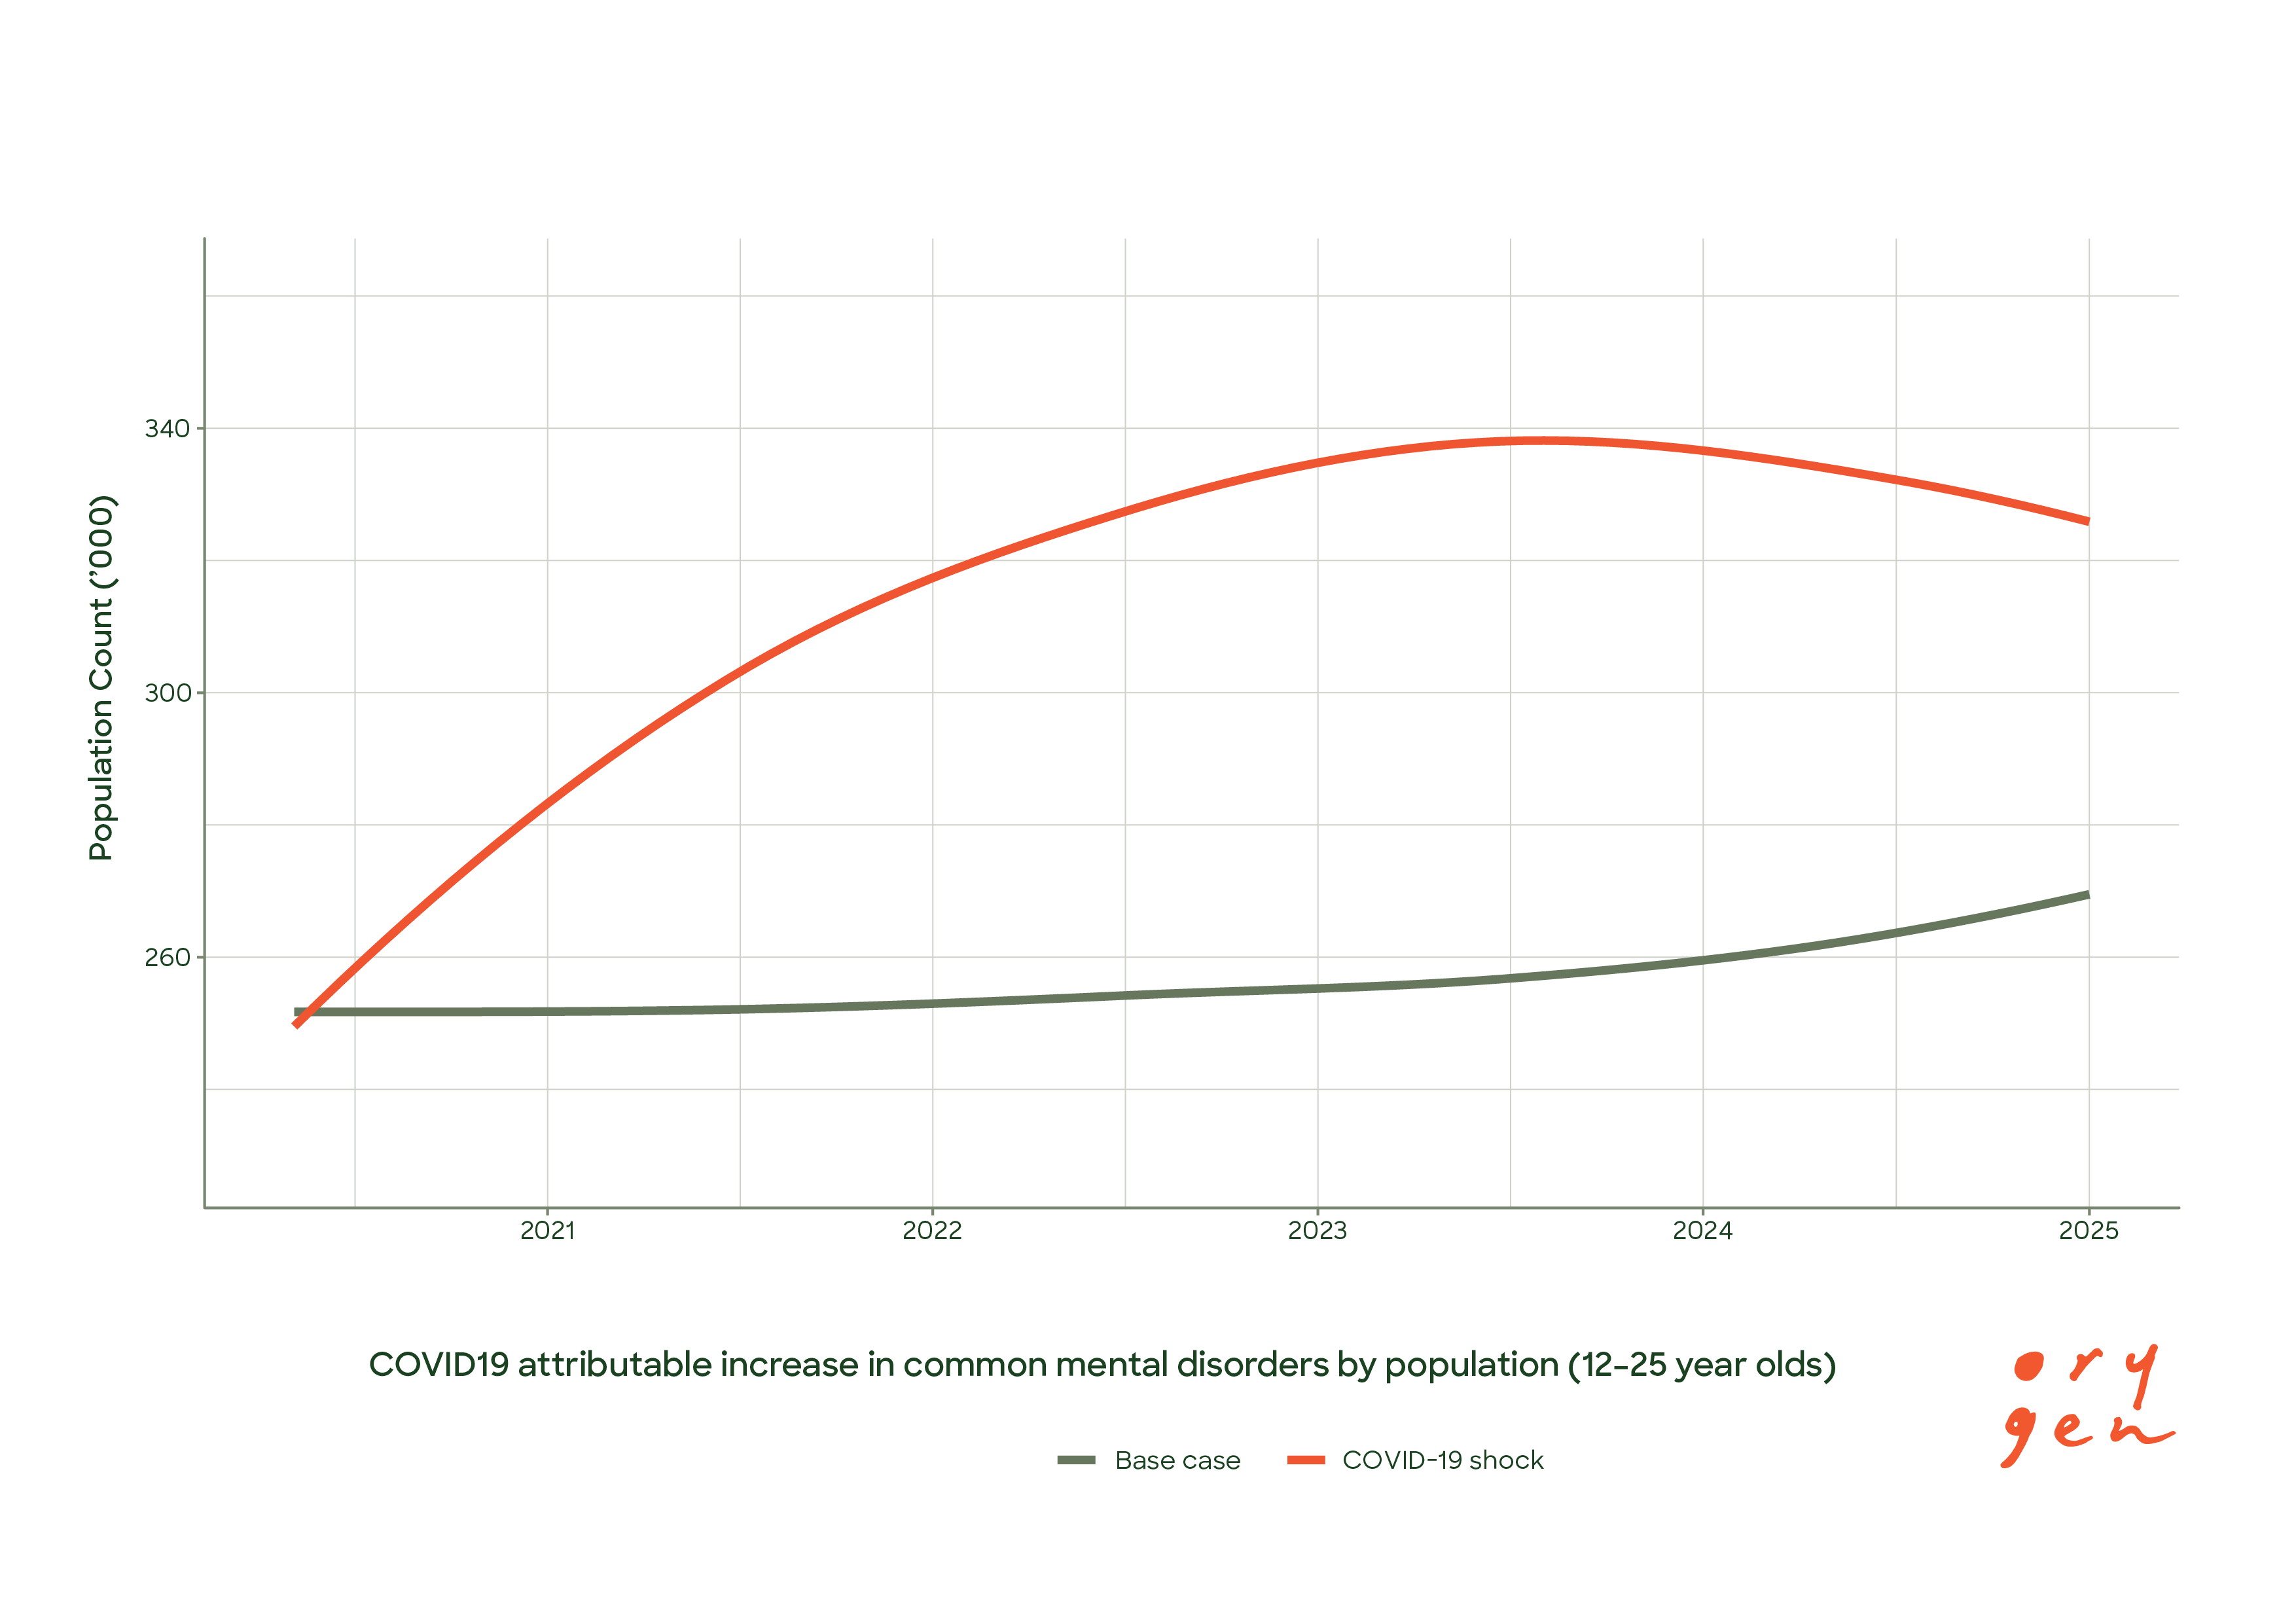 COVID19 attributable increase in common mental disorders by population (12-25 year olds)